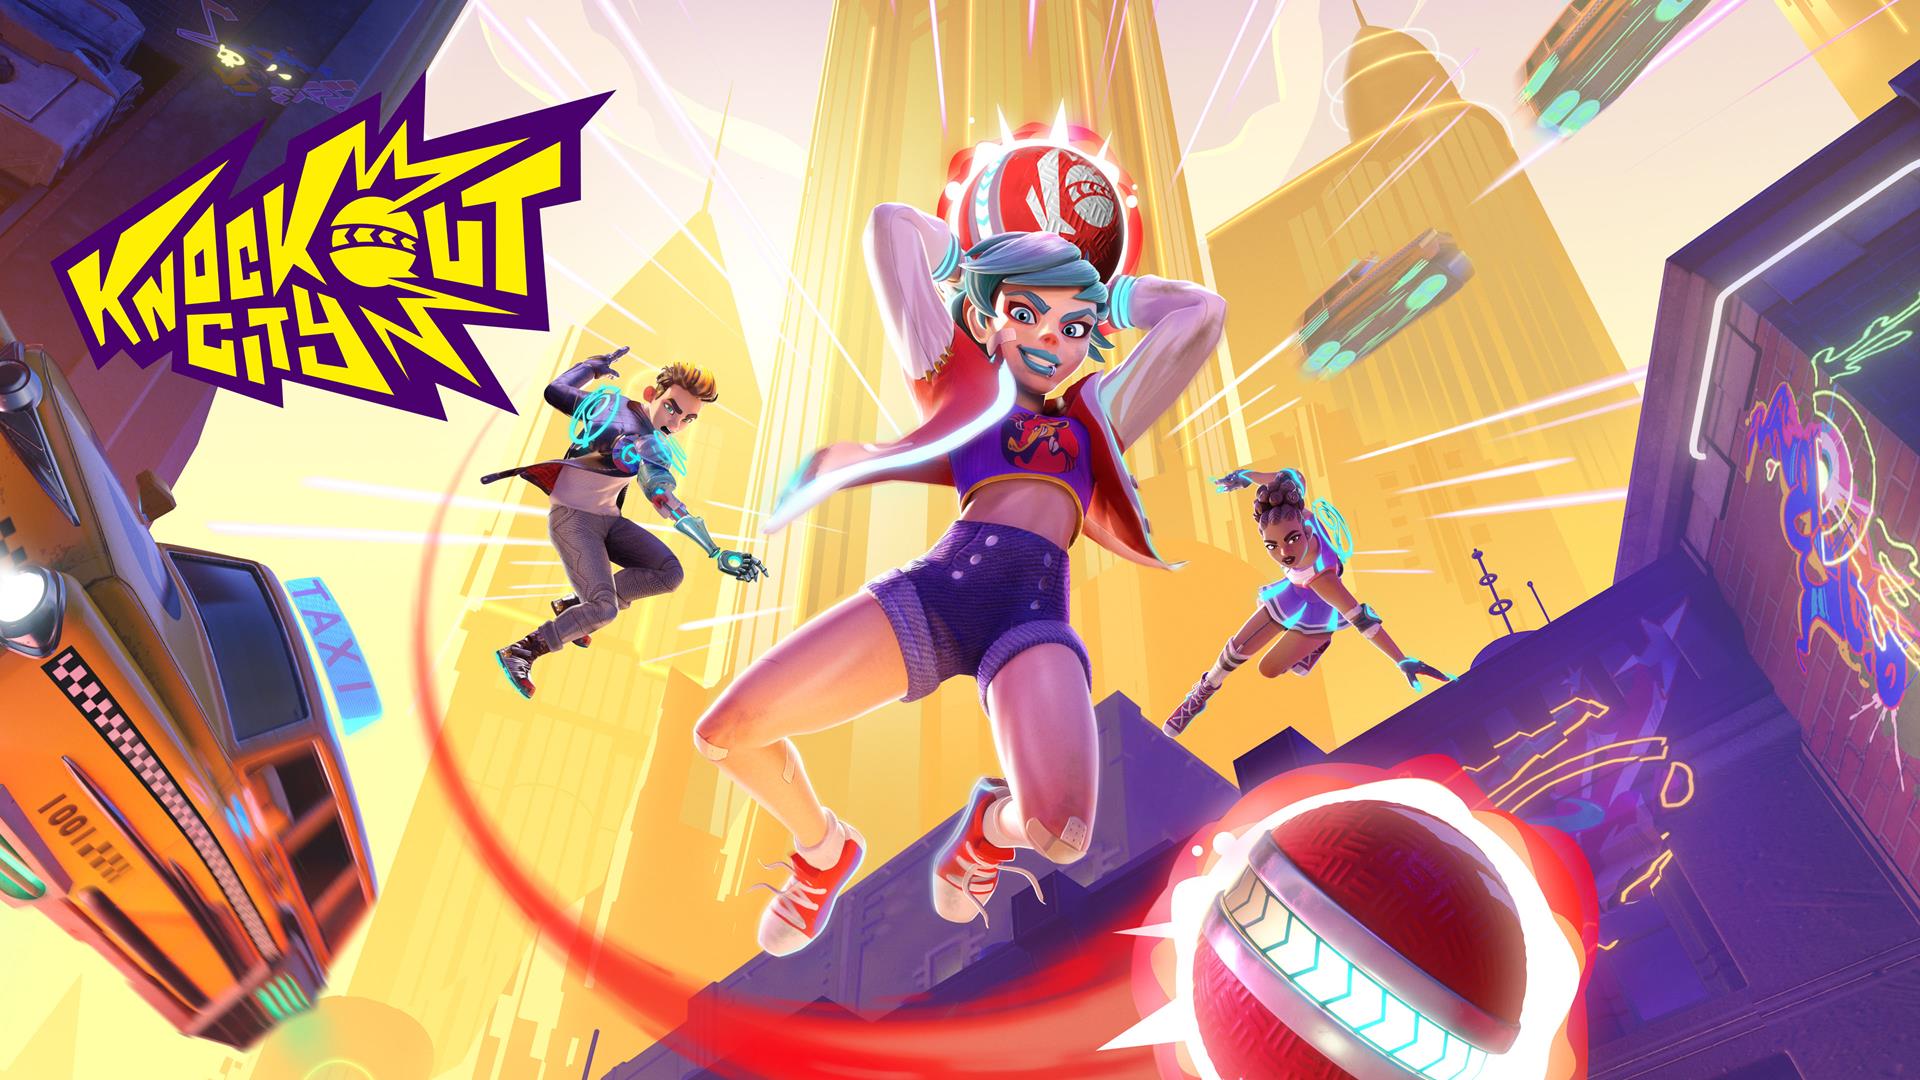 Image for Knockout City is a competitive dodgeball game from EA and Mario Kart Live creators